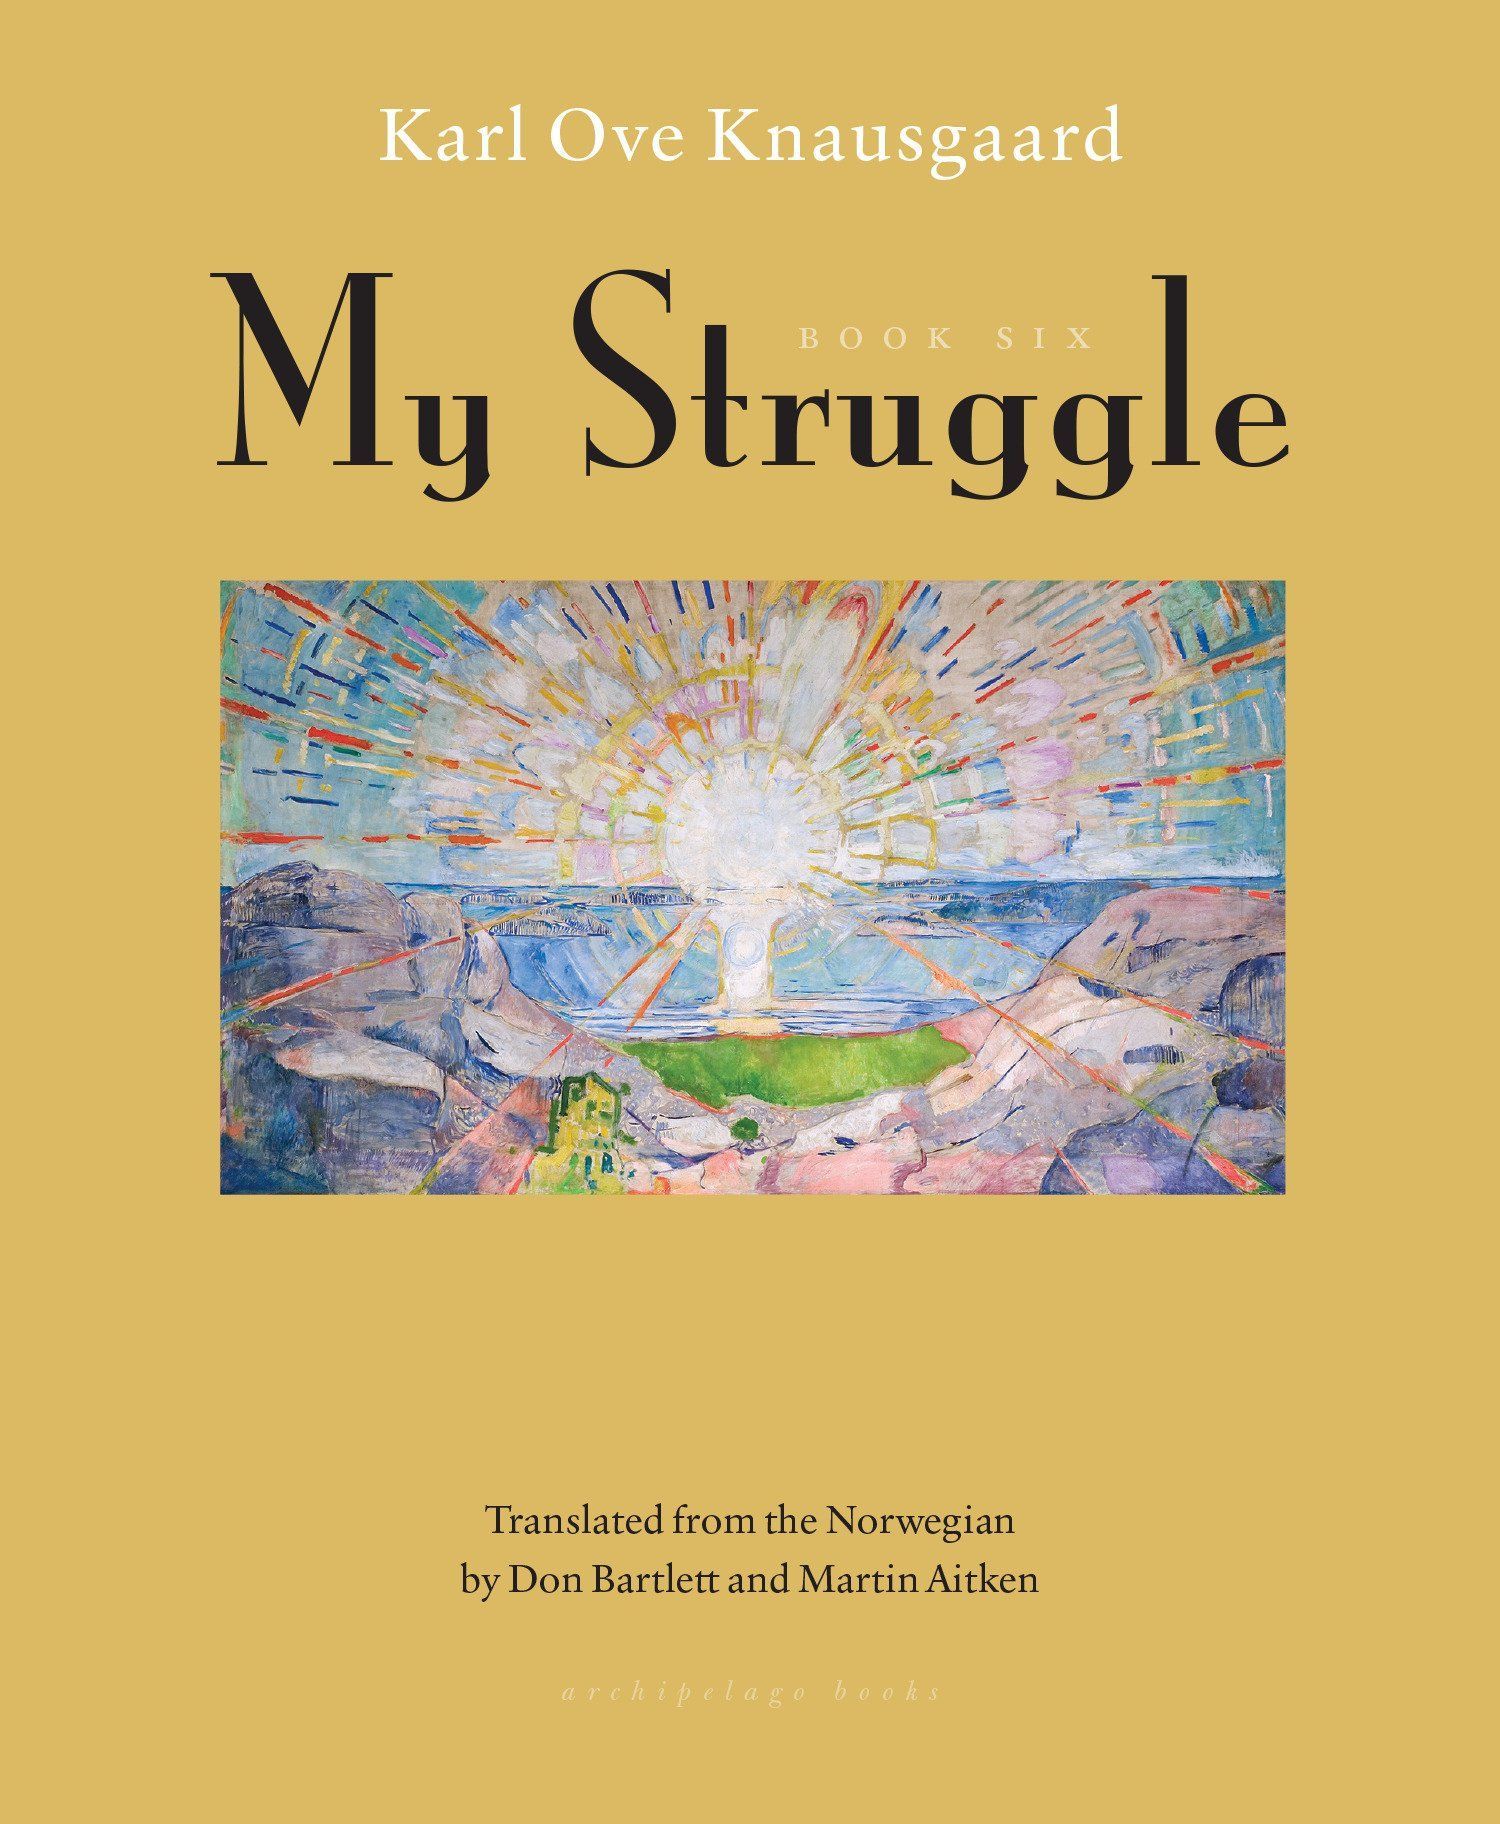 The Form of the Small Life: Karl Ove Knausgaard’s “My Struggle: Book Six”